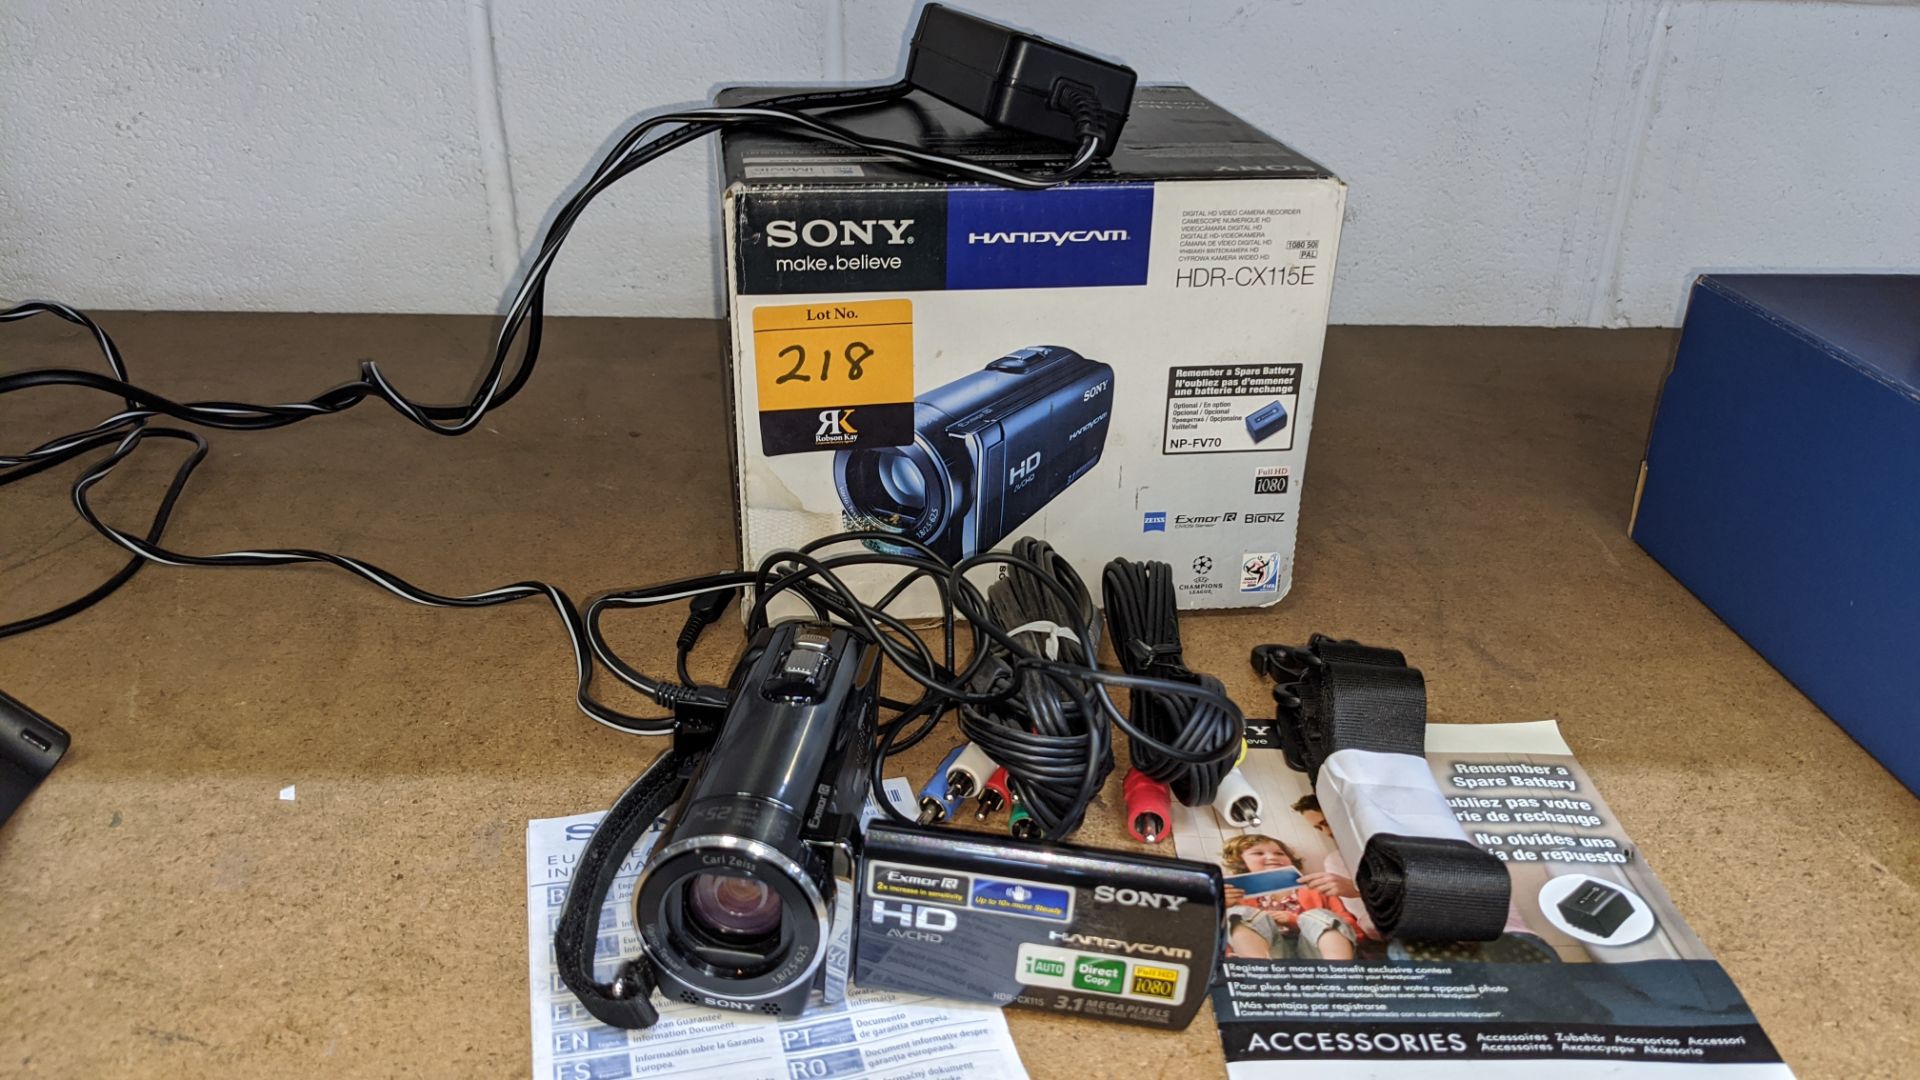 Sony Handycam video camera model HDR-CX115E including box, manual, cables & accessories - Image 8 of 8